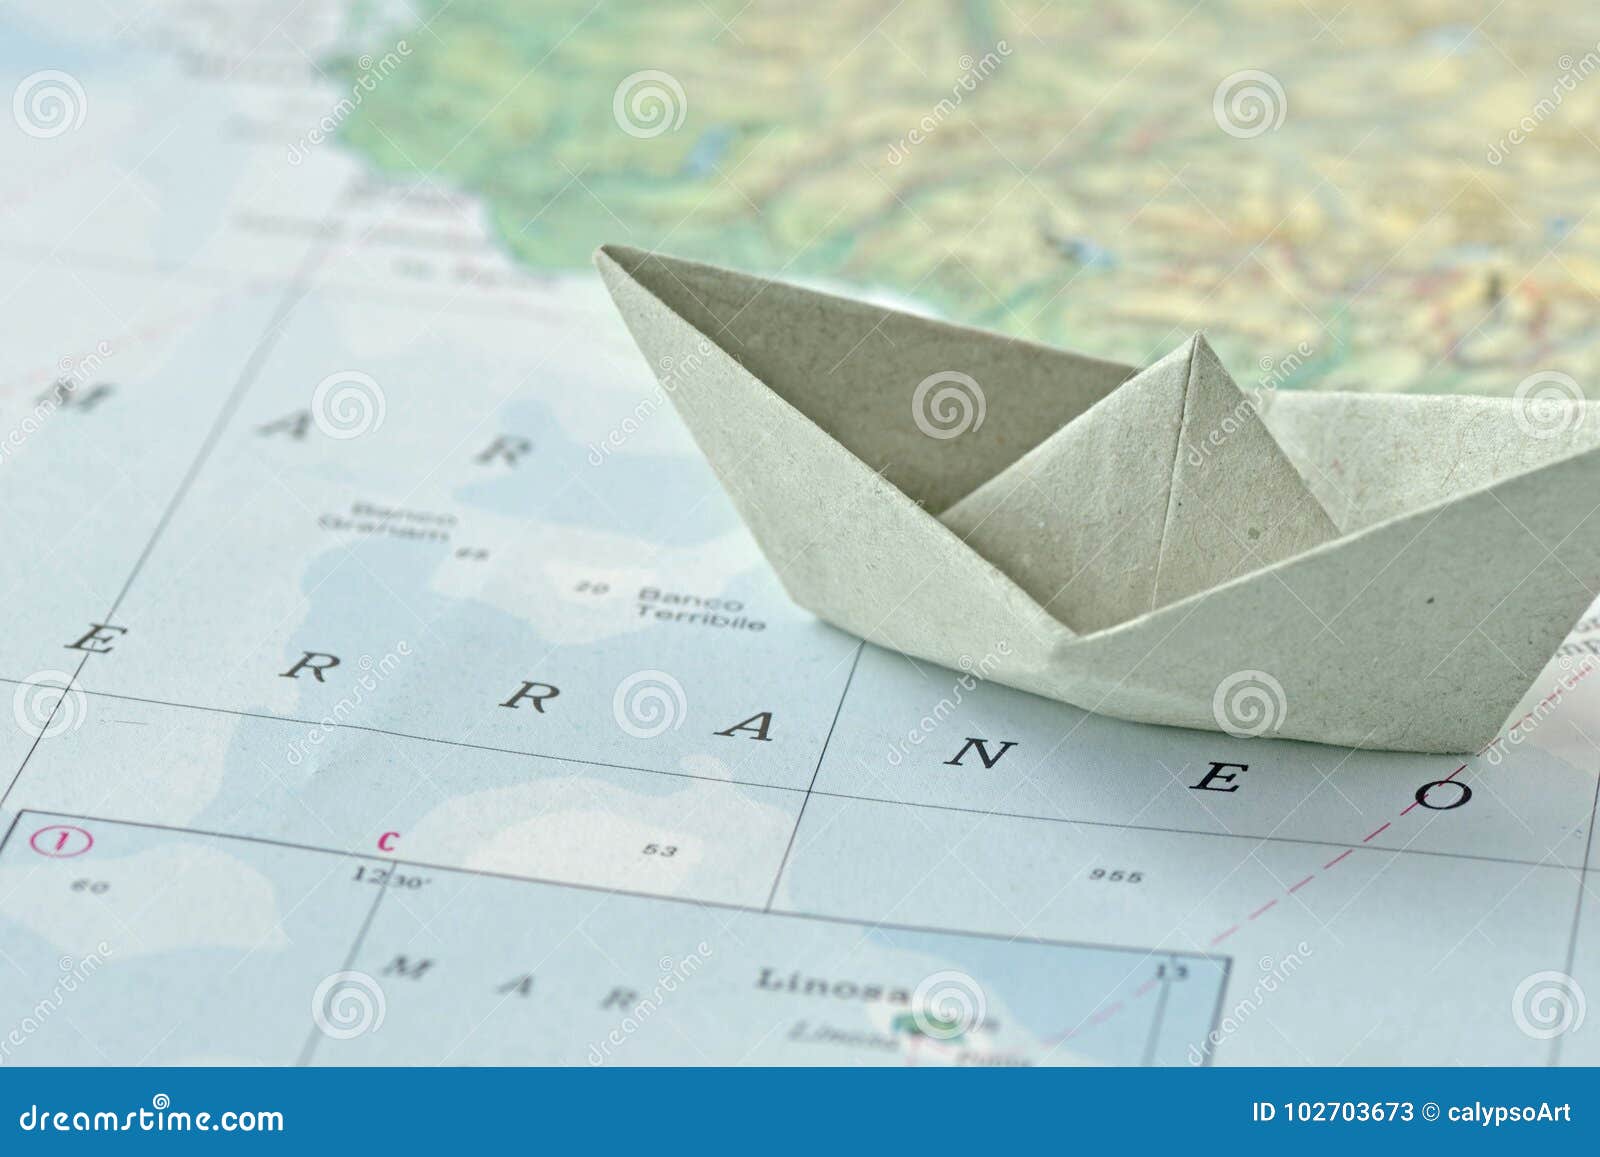 immigration and ask for asylum concept - paper boat on map